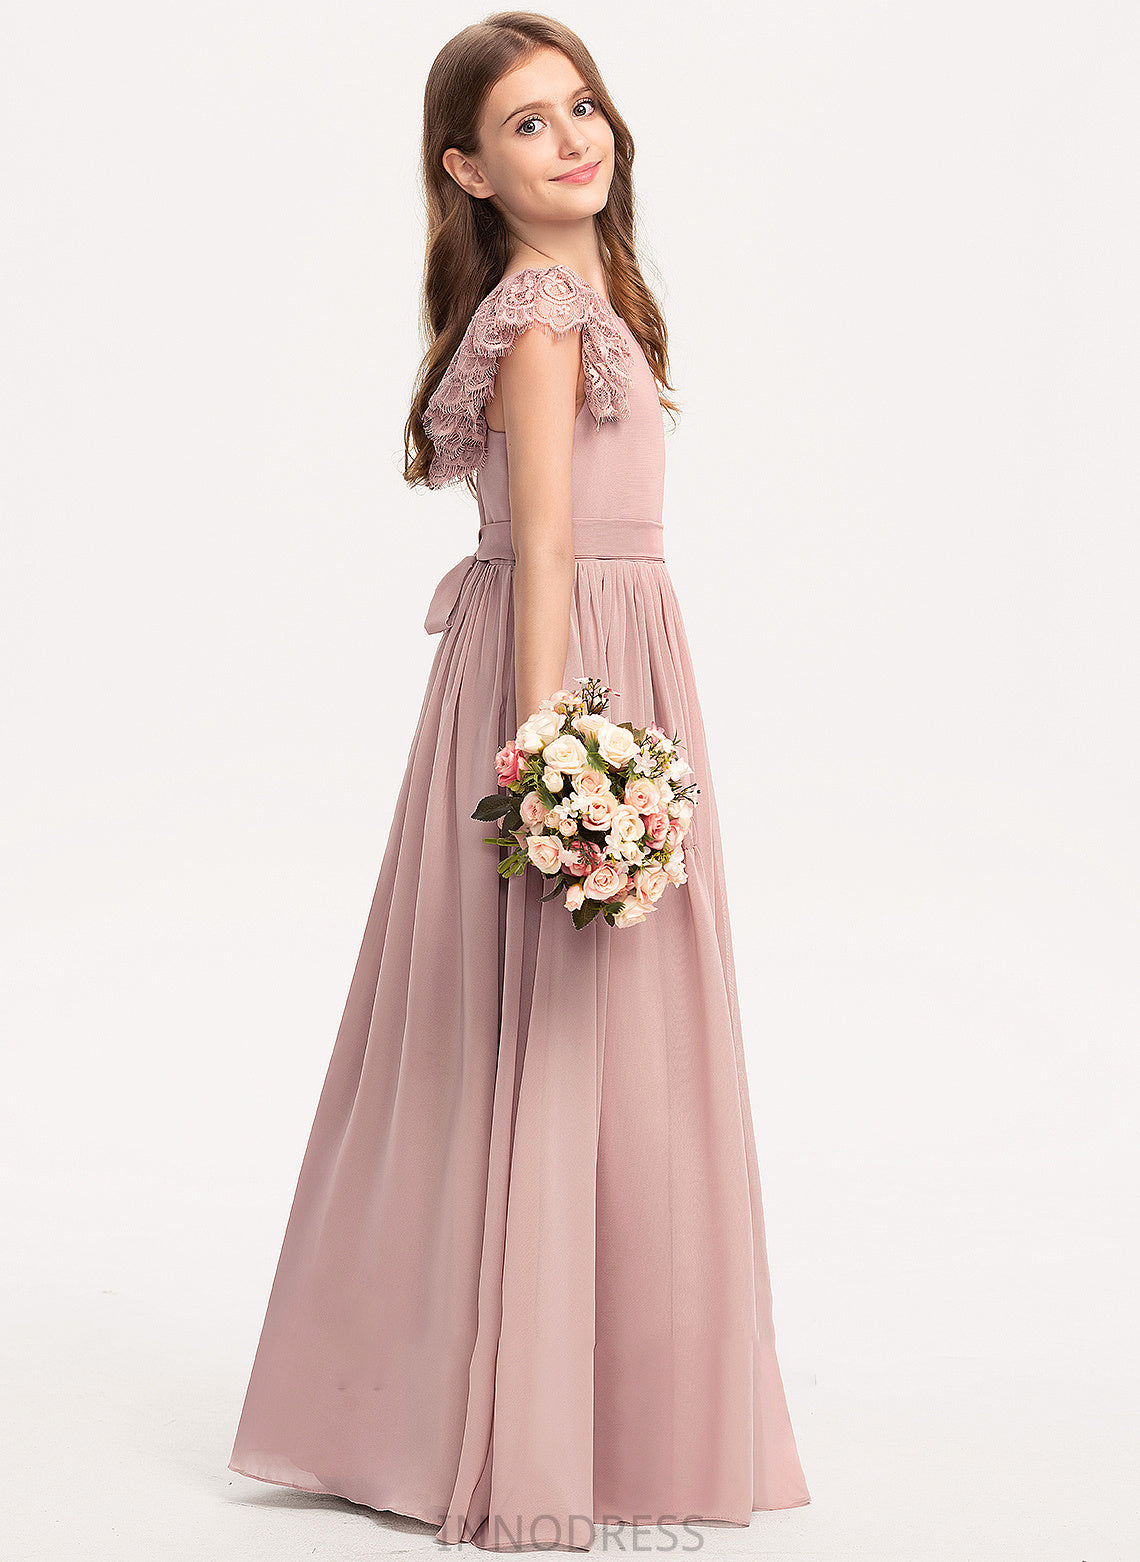 Scoop Junior Bridesmaid Dresses Bow(s) Chiffon A-Line Mareli With Lace Floor-Length Neck